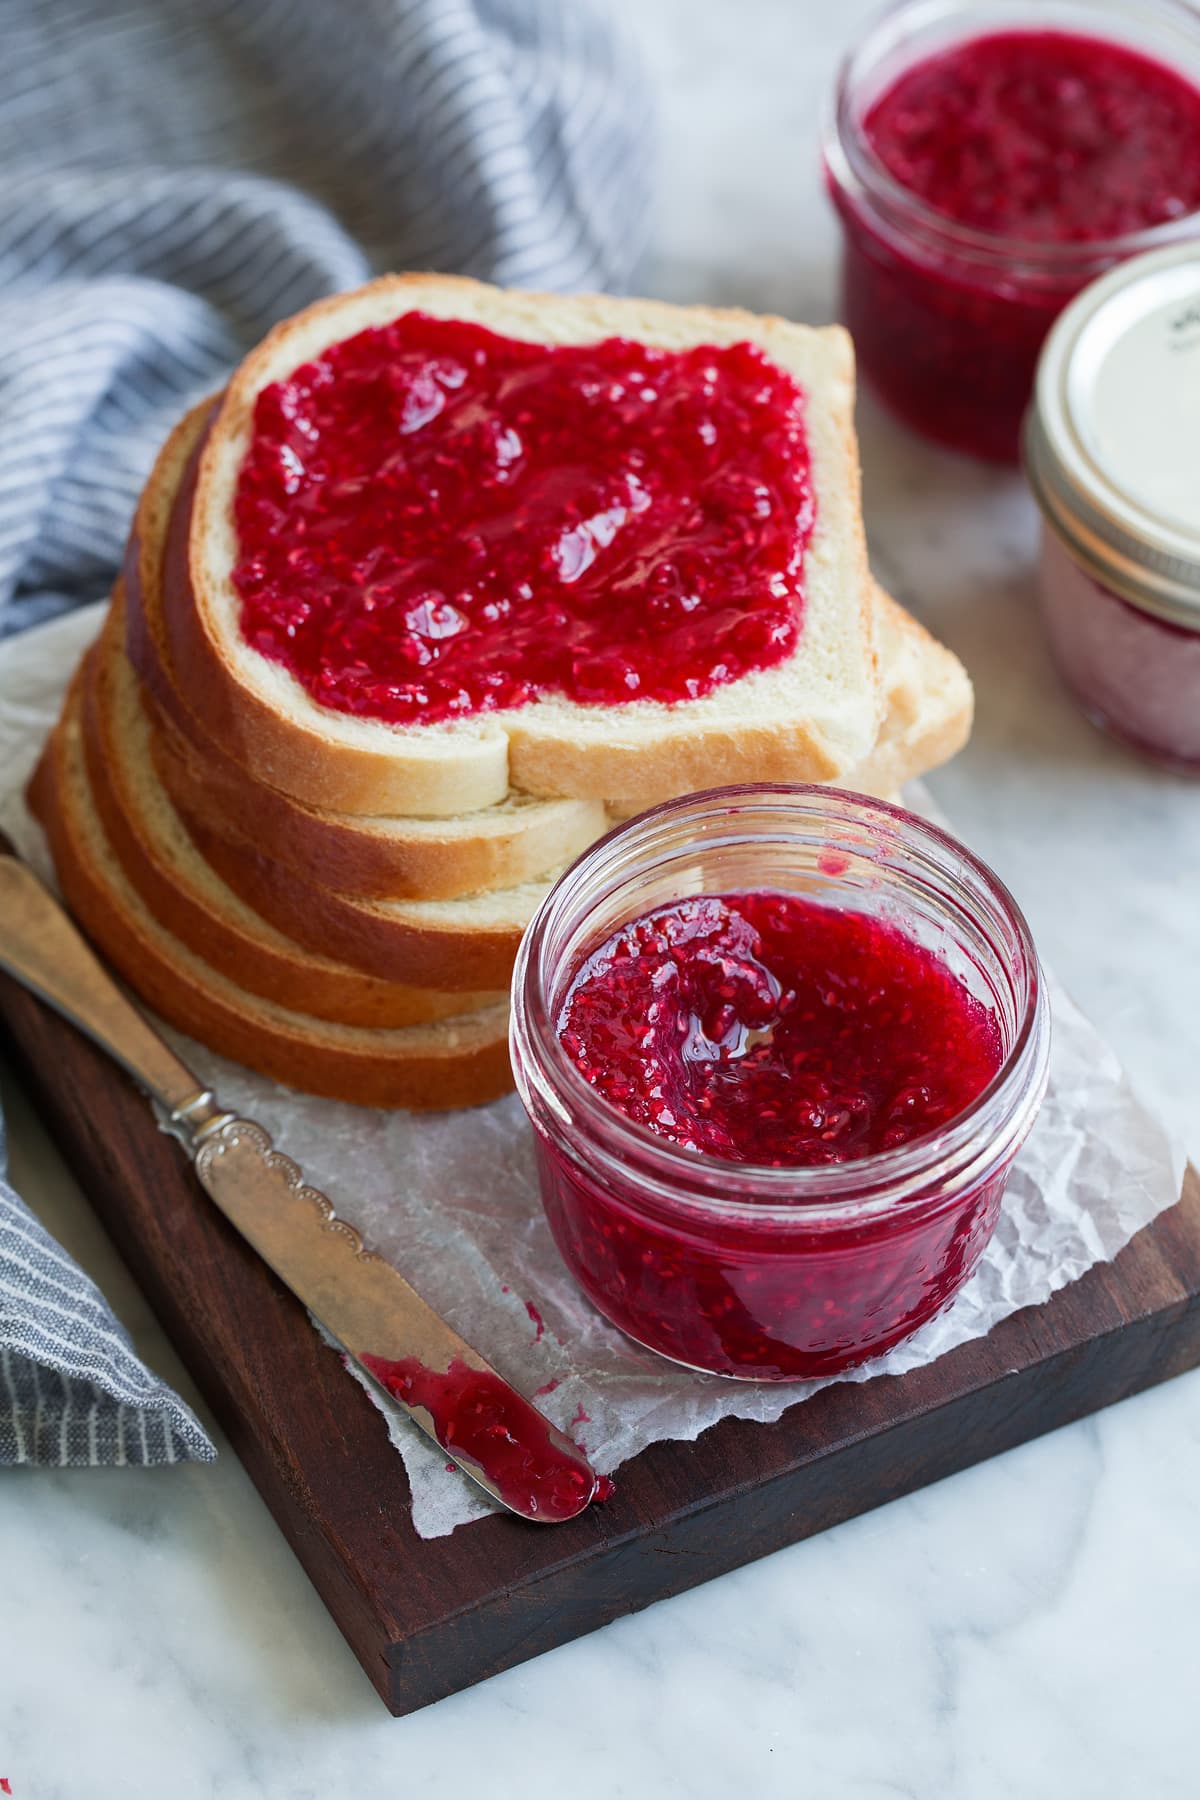 Homemade jam in a jar next to a stack of bread with top slice slathered in jam.